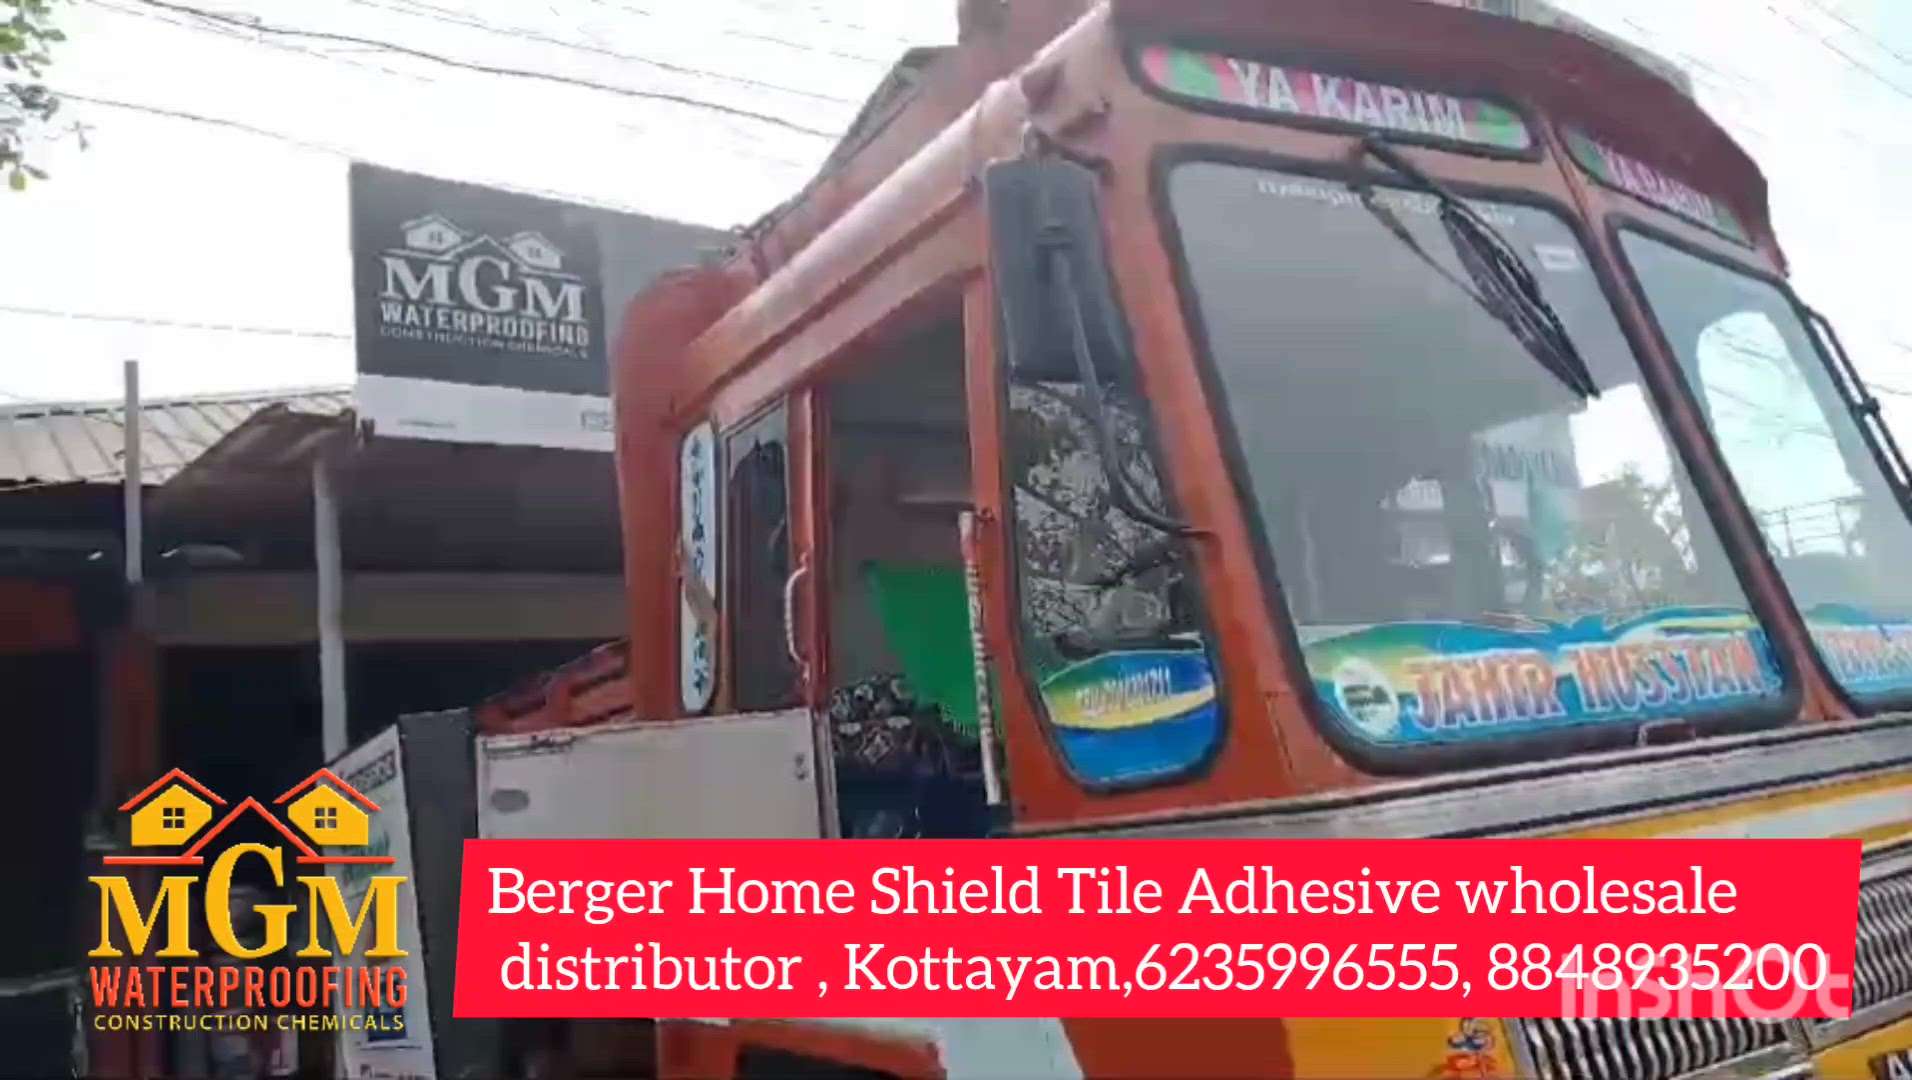 New Load arrived ....🚛
Berger Home Shield Tile Adhesive available at wholesale rate.
Wholesale distributor: MGM Waterproofing and Construction Chemicals, Kottayam.

#tileadhesive #waterproofingproducts #constructionchemicals #kottayam #pathanamthitta #alappuzha #kollam #Idukki